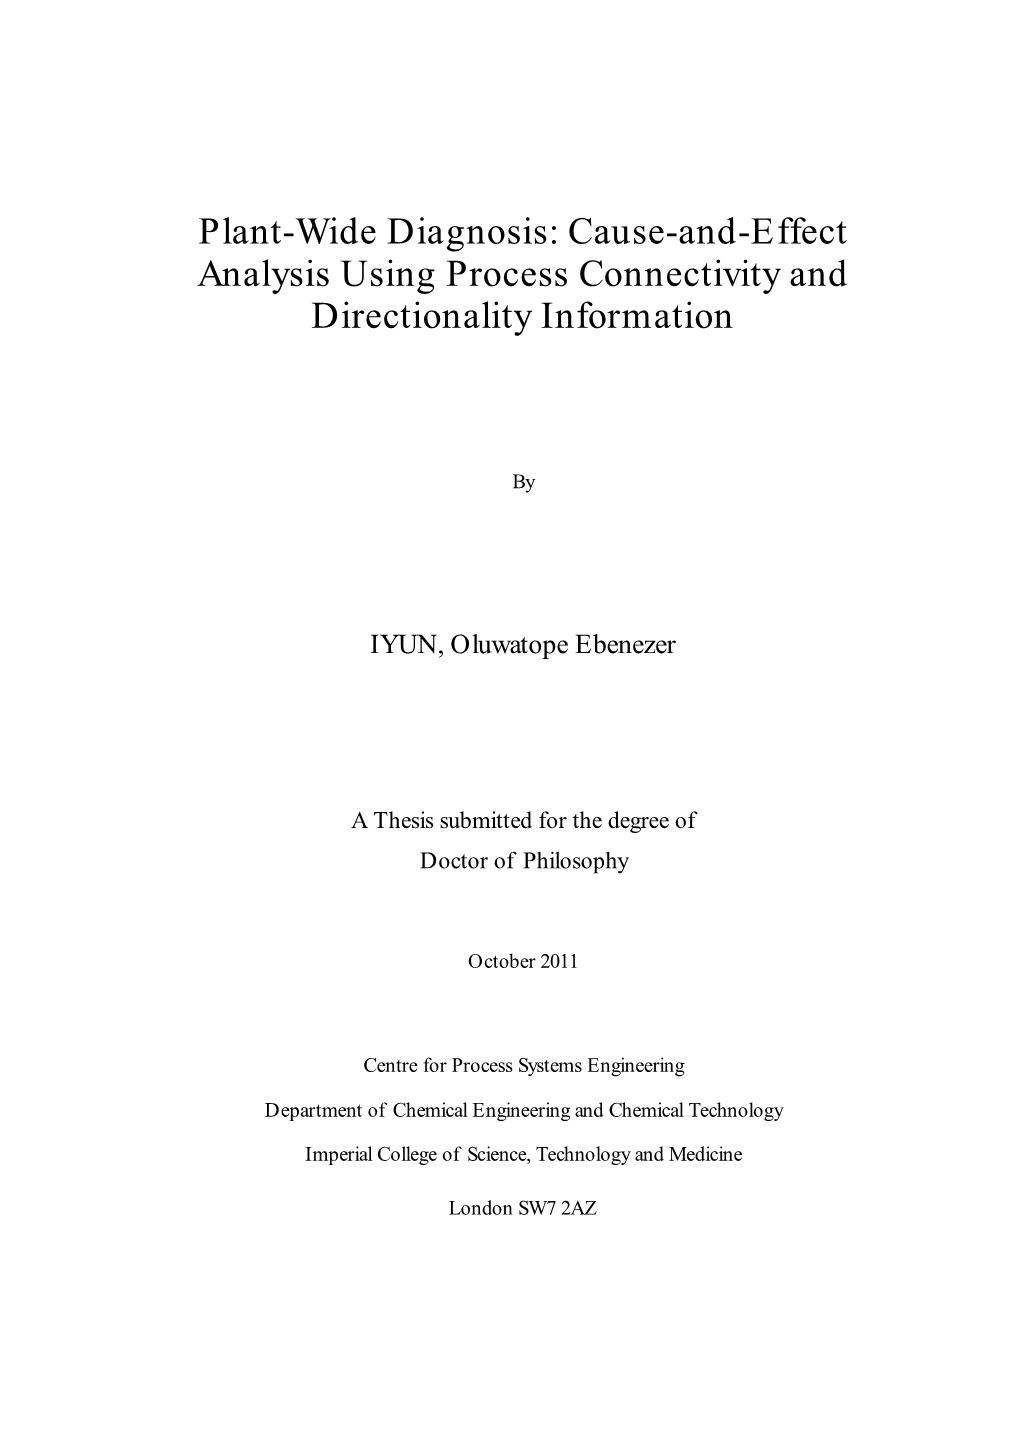 Plant-Wide Diagnosis: Cause-And-Effect Analysis Using Process Connectivity and Directionality Information